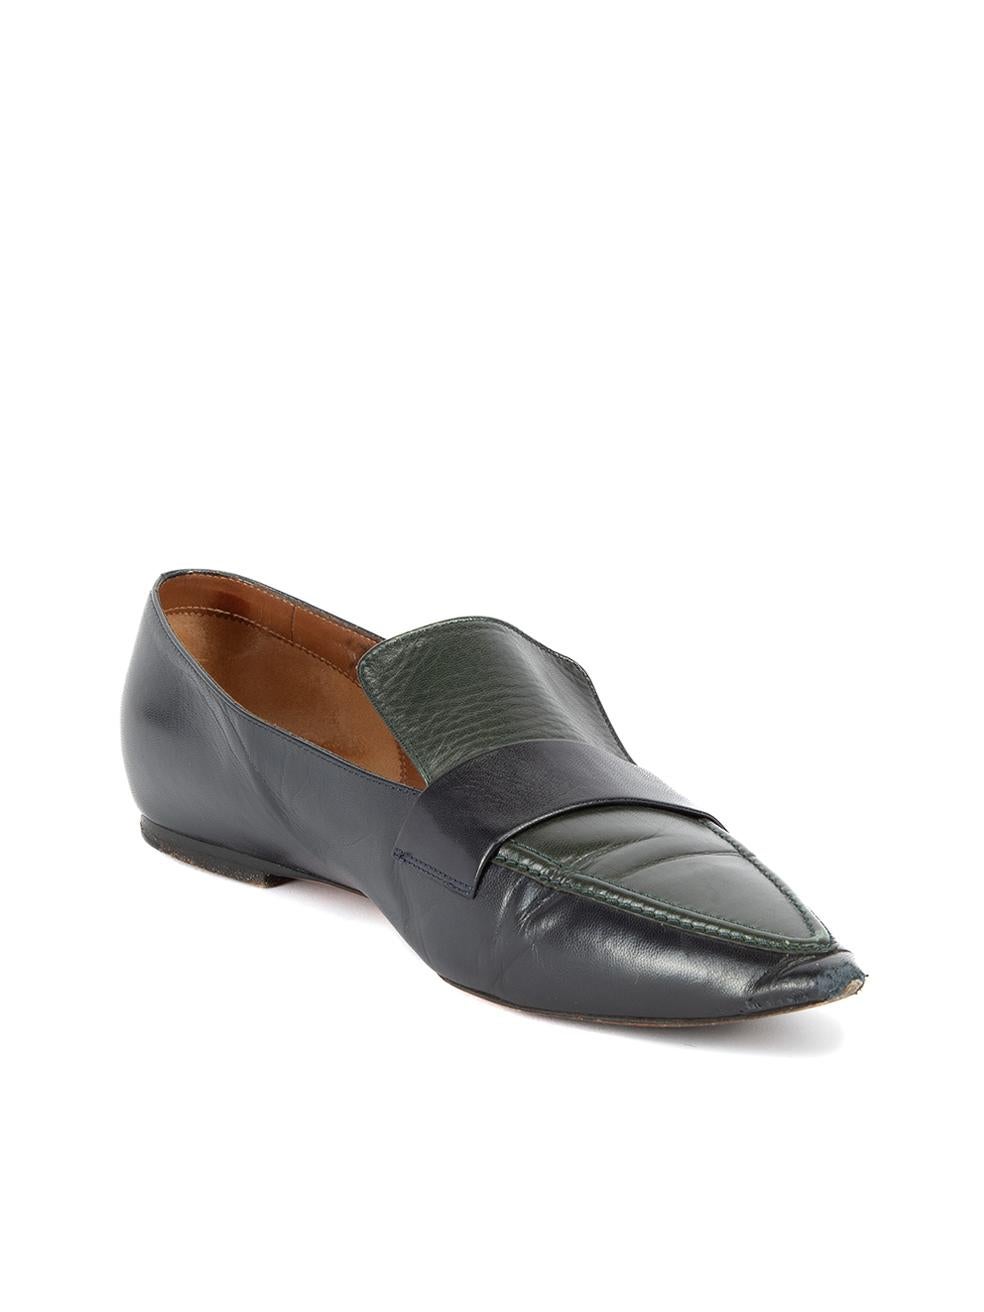 CONDITION is Good. Minor wear to loafers is evident. Light wear to exterior leather material, visible peeling can be seen on the shoe tip on this used Céline designer resale item. This item comes with original dustbag and shoebox. Details Black and